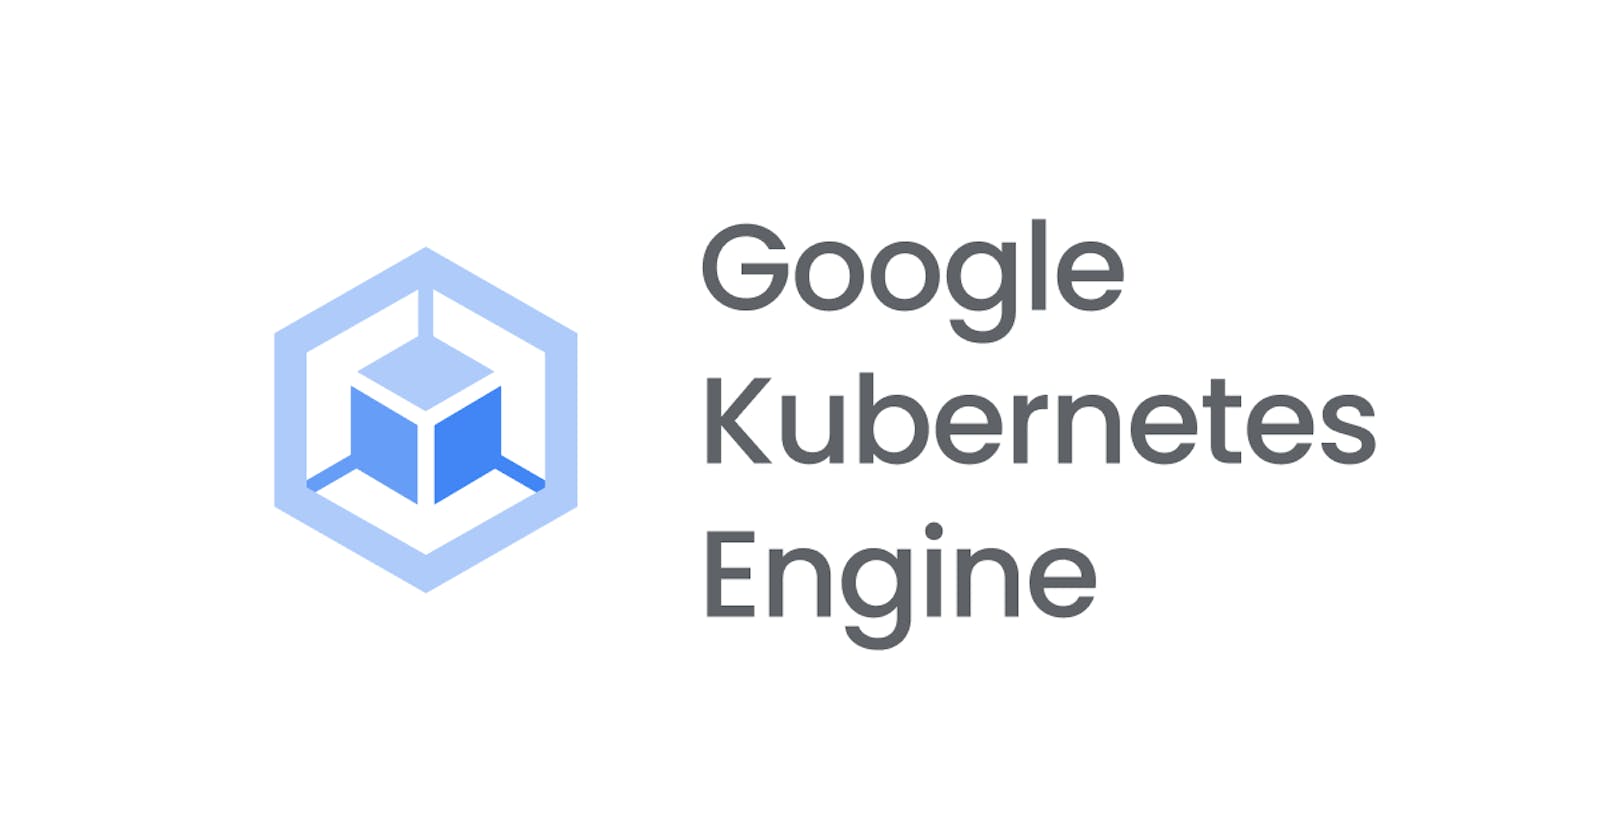 The orchestrator you hire from Google - Google Kubernetes Engine